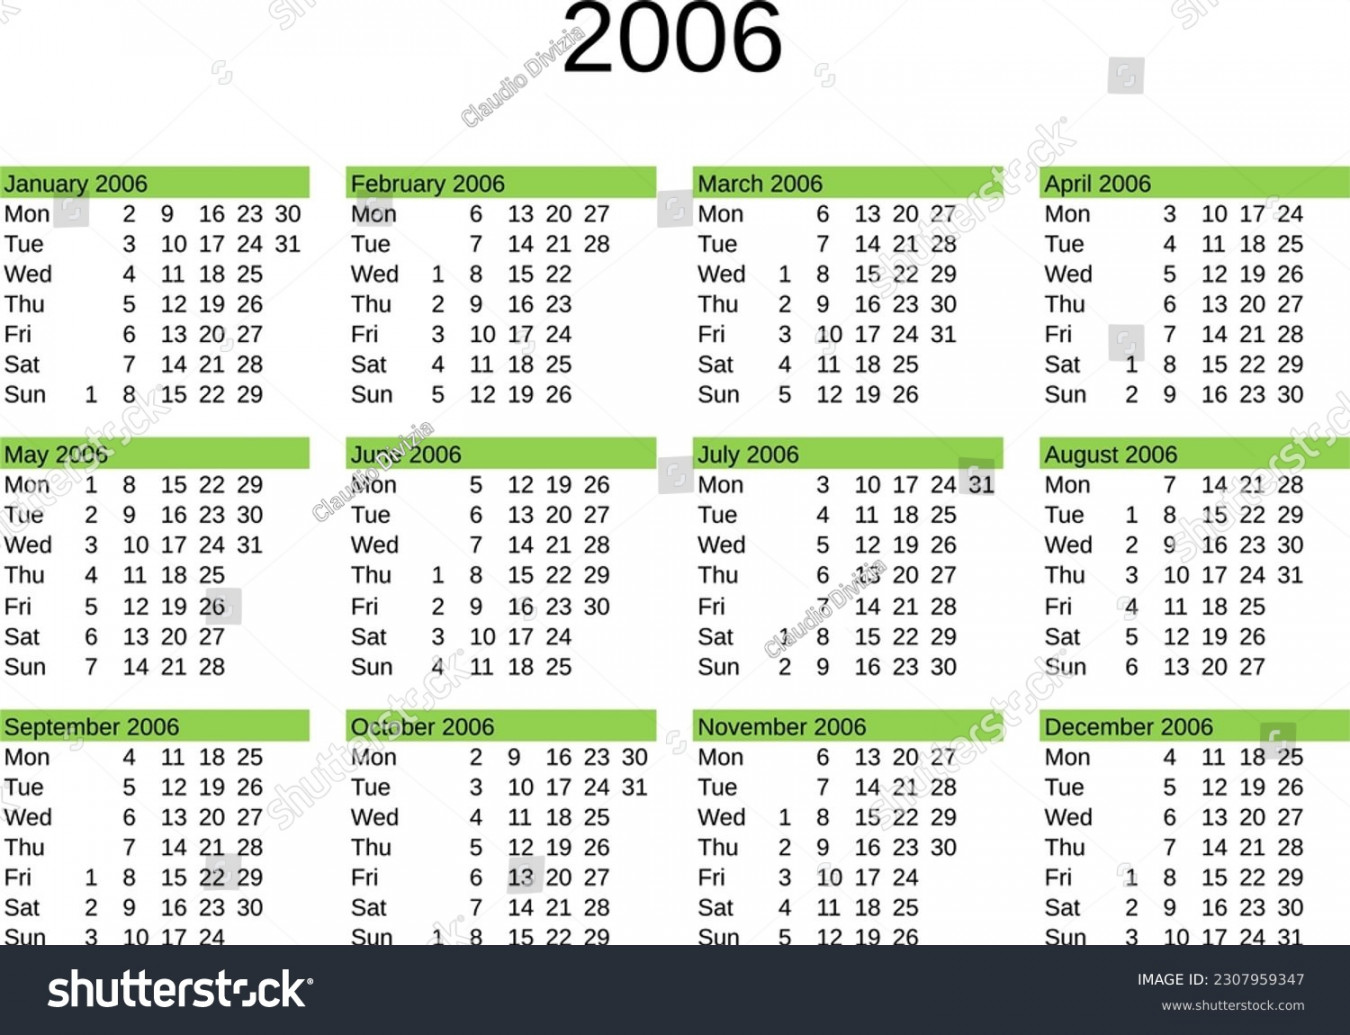 Calendar: Over Royalty Free Licensable Stock Vectors